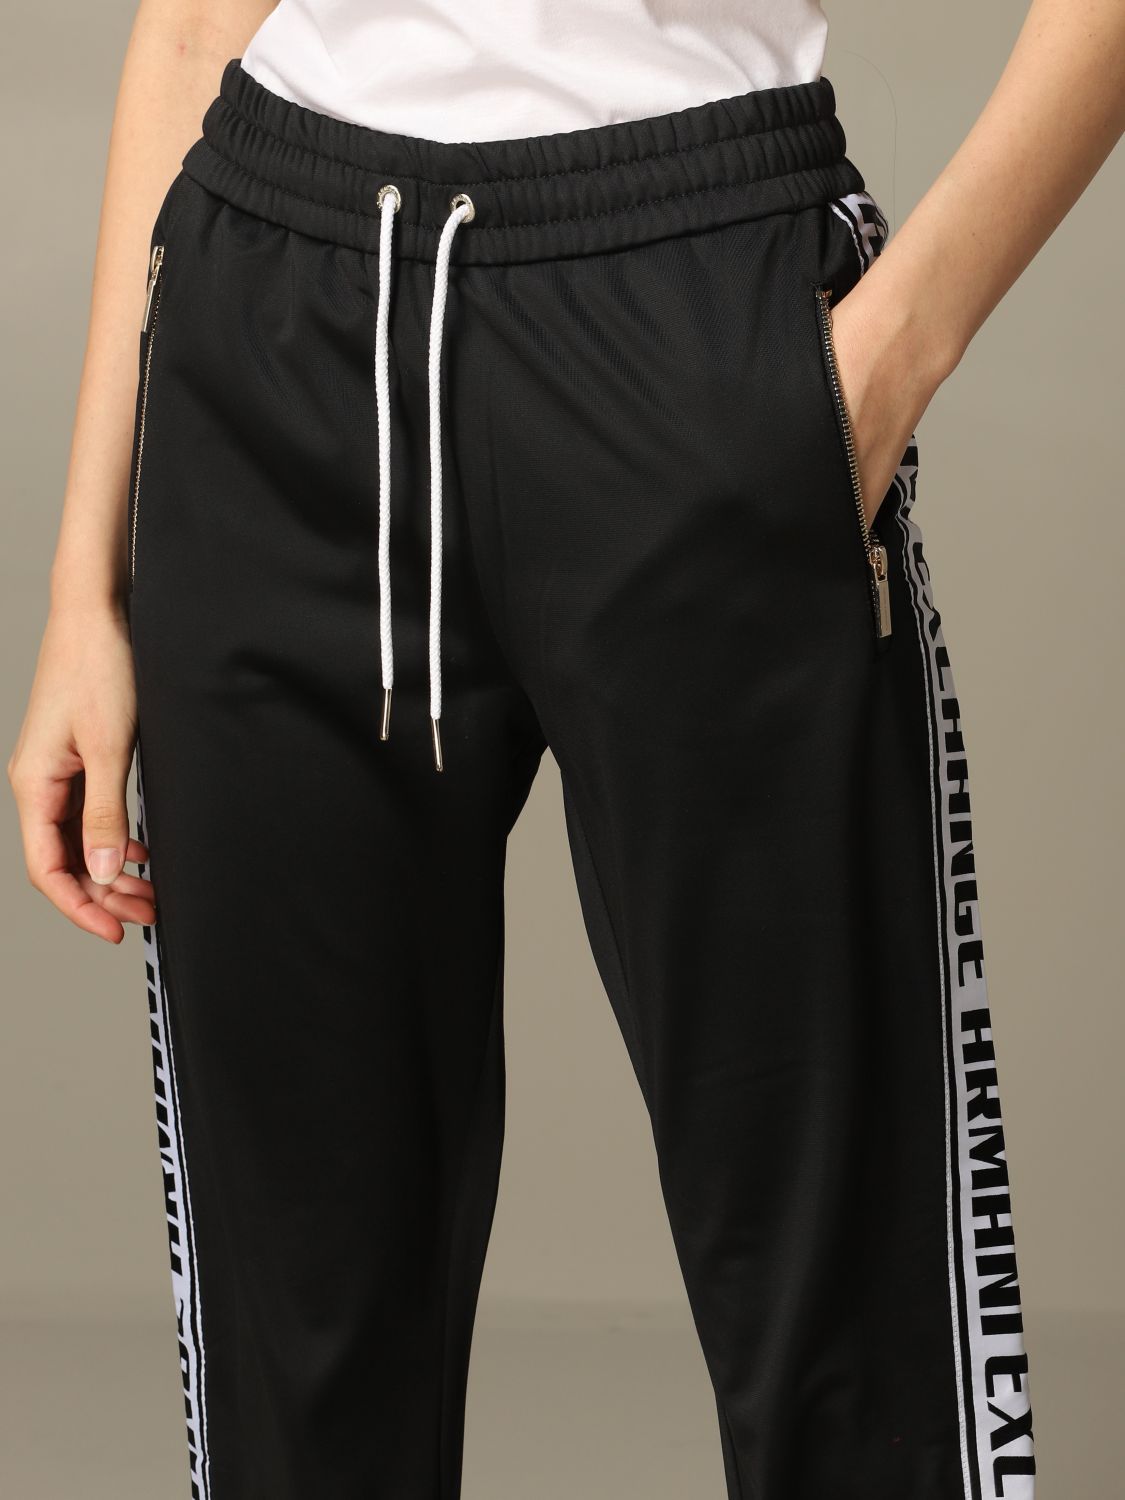 Armani Exchange jogging trousers with logoed bands | Pants ...